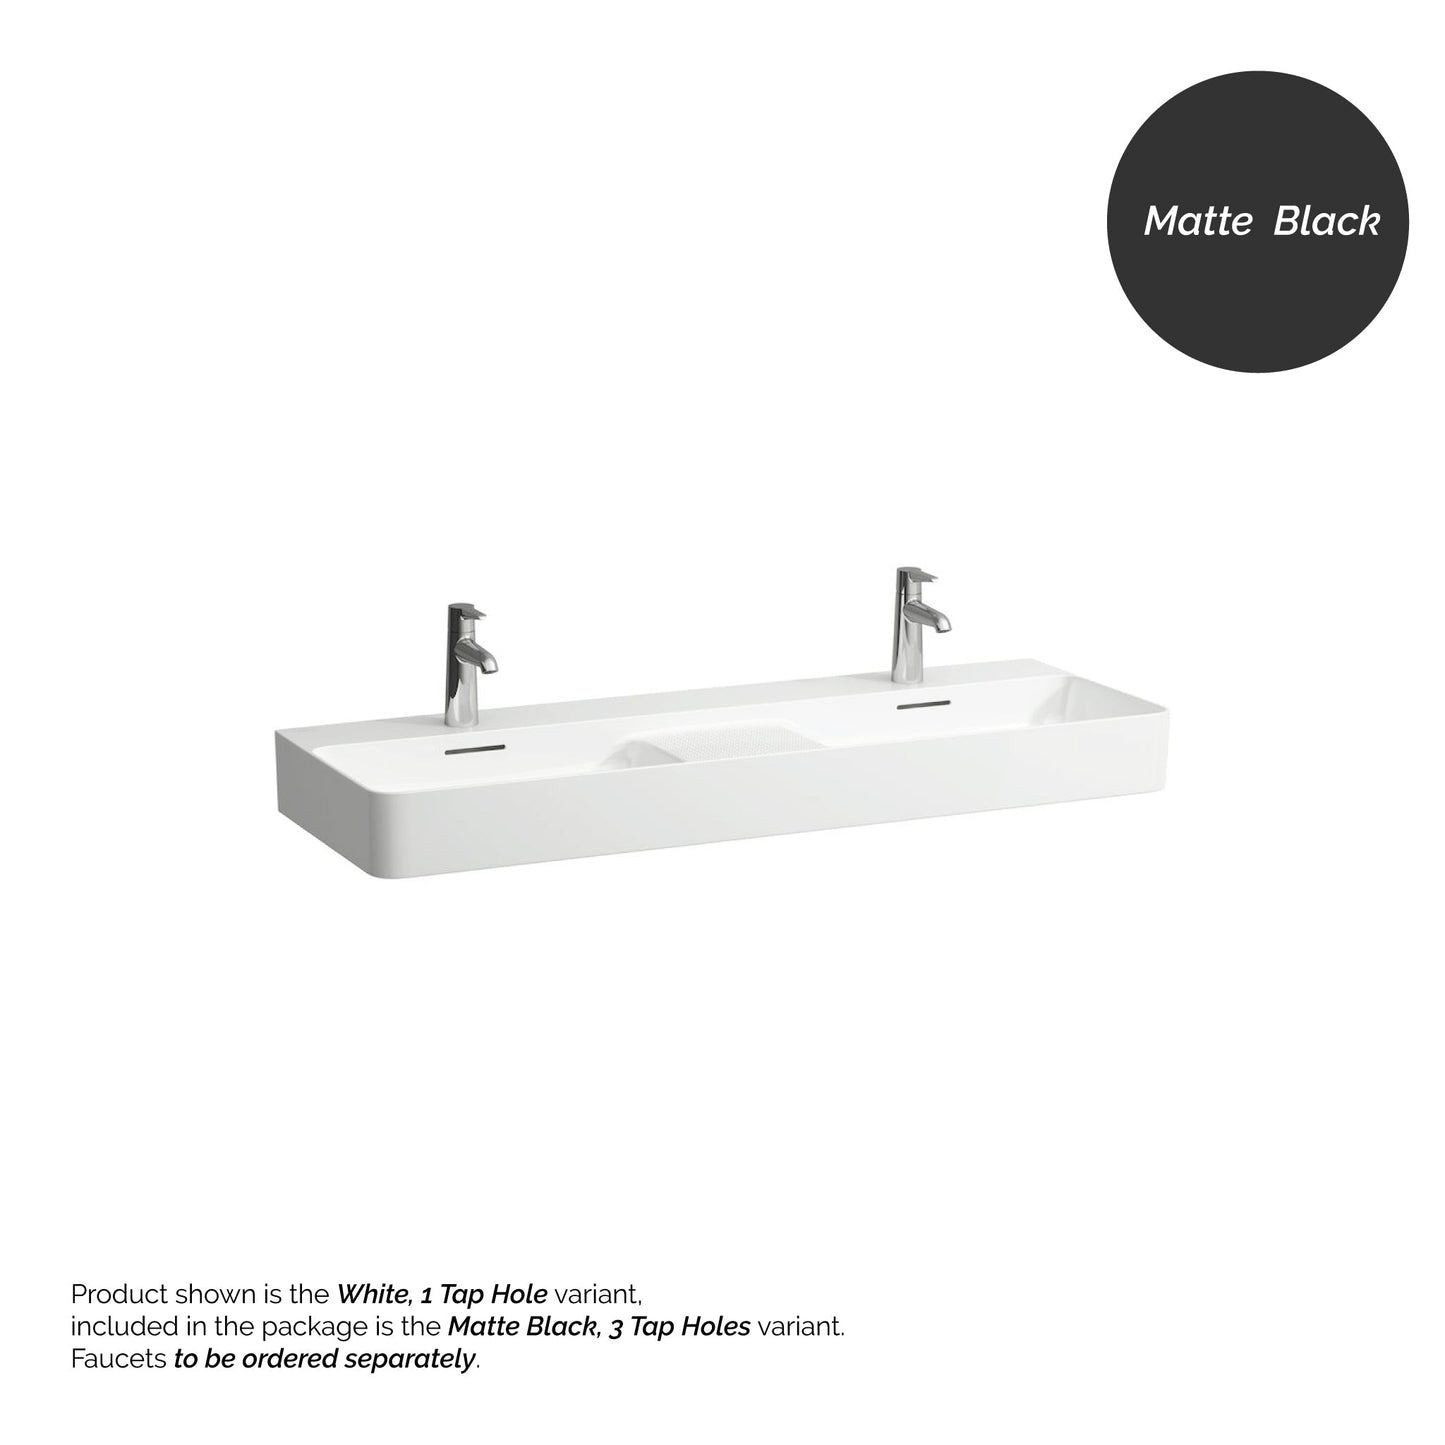 Laufen Val 47" x 17" Matte Black Ceramic Wall-Mounted Double Bathroom Sink With 6 Faucet Holes